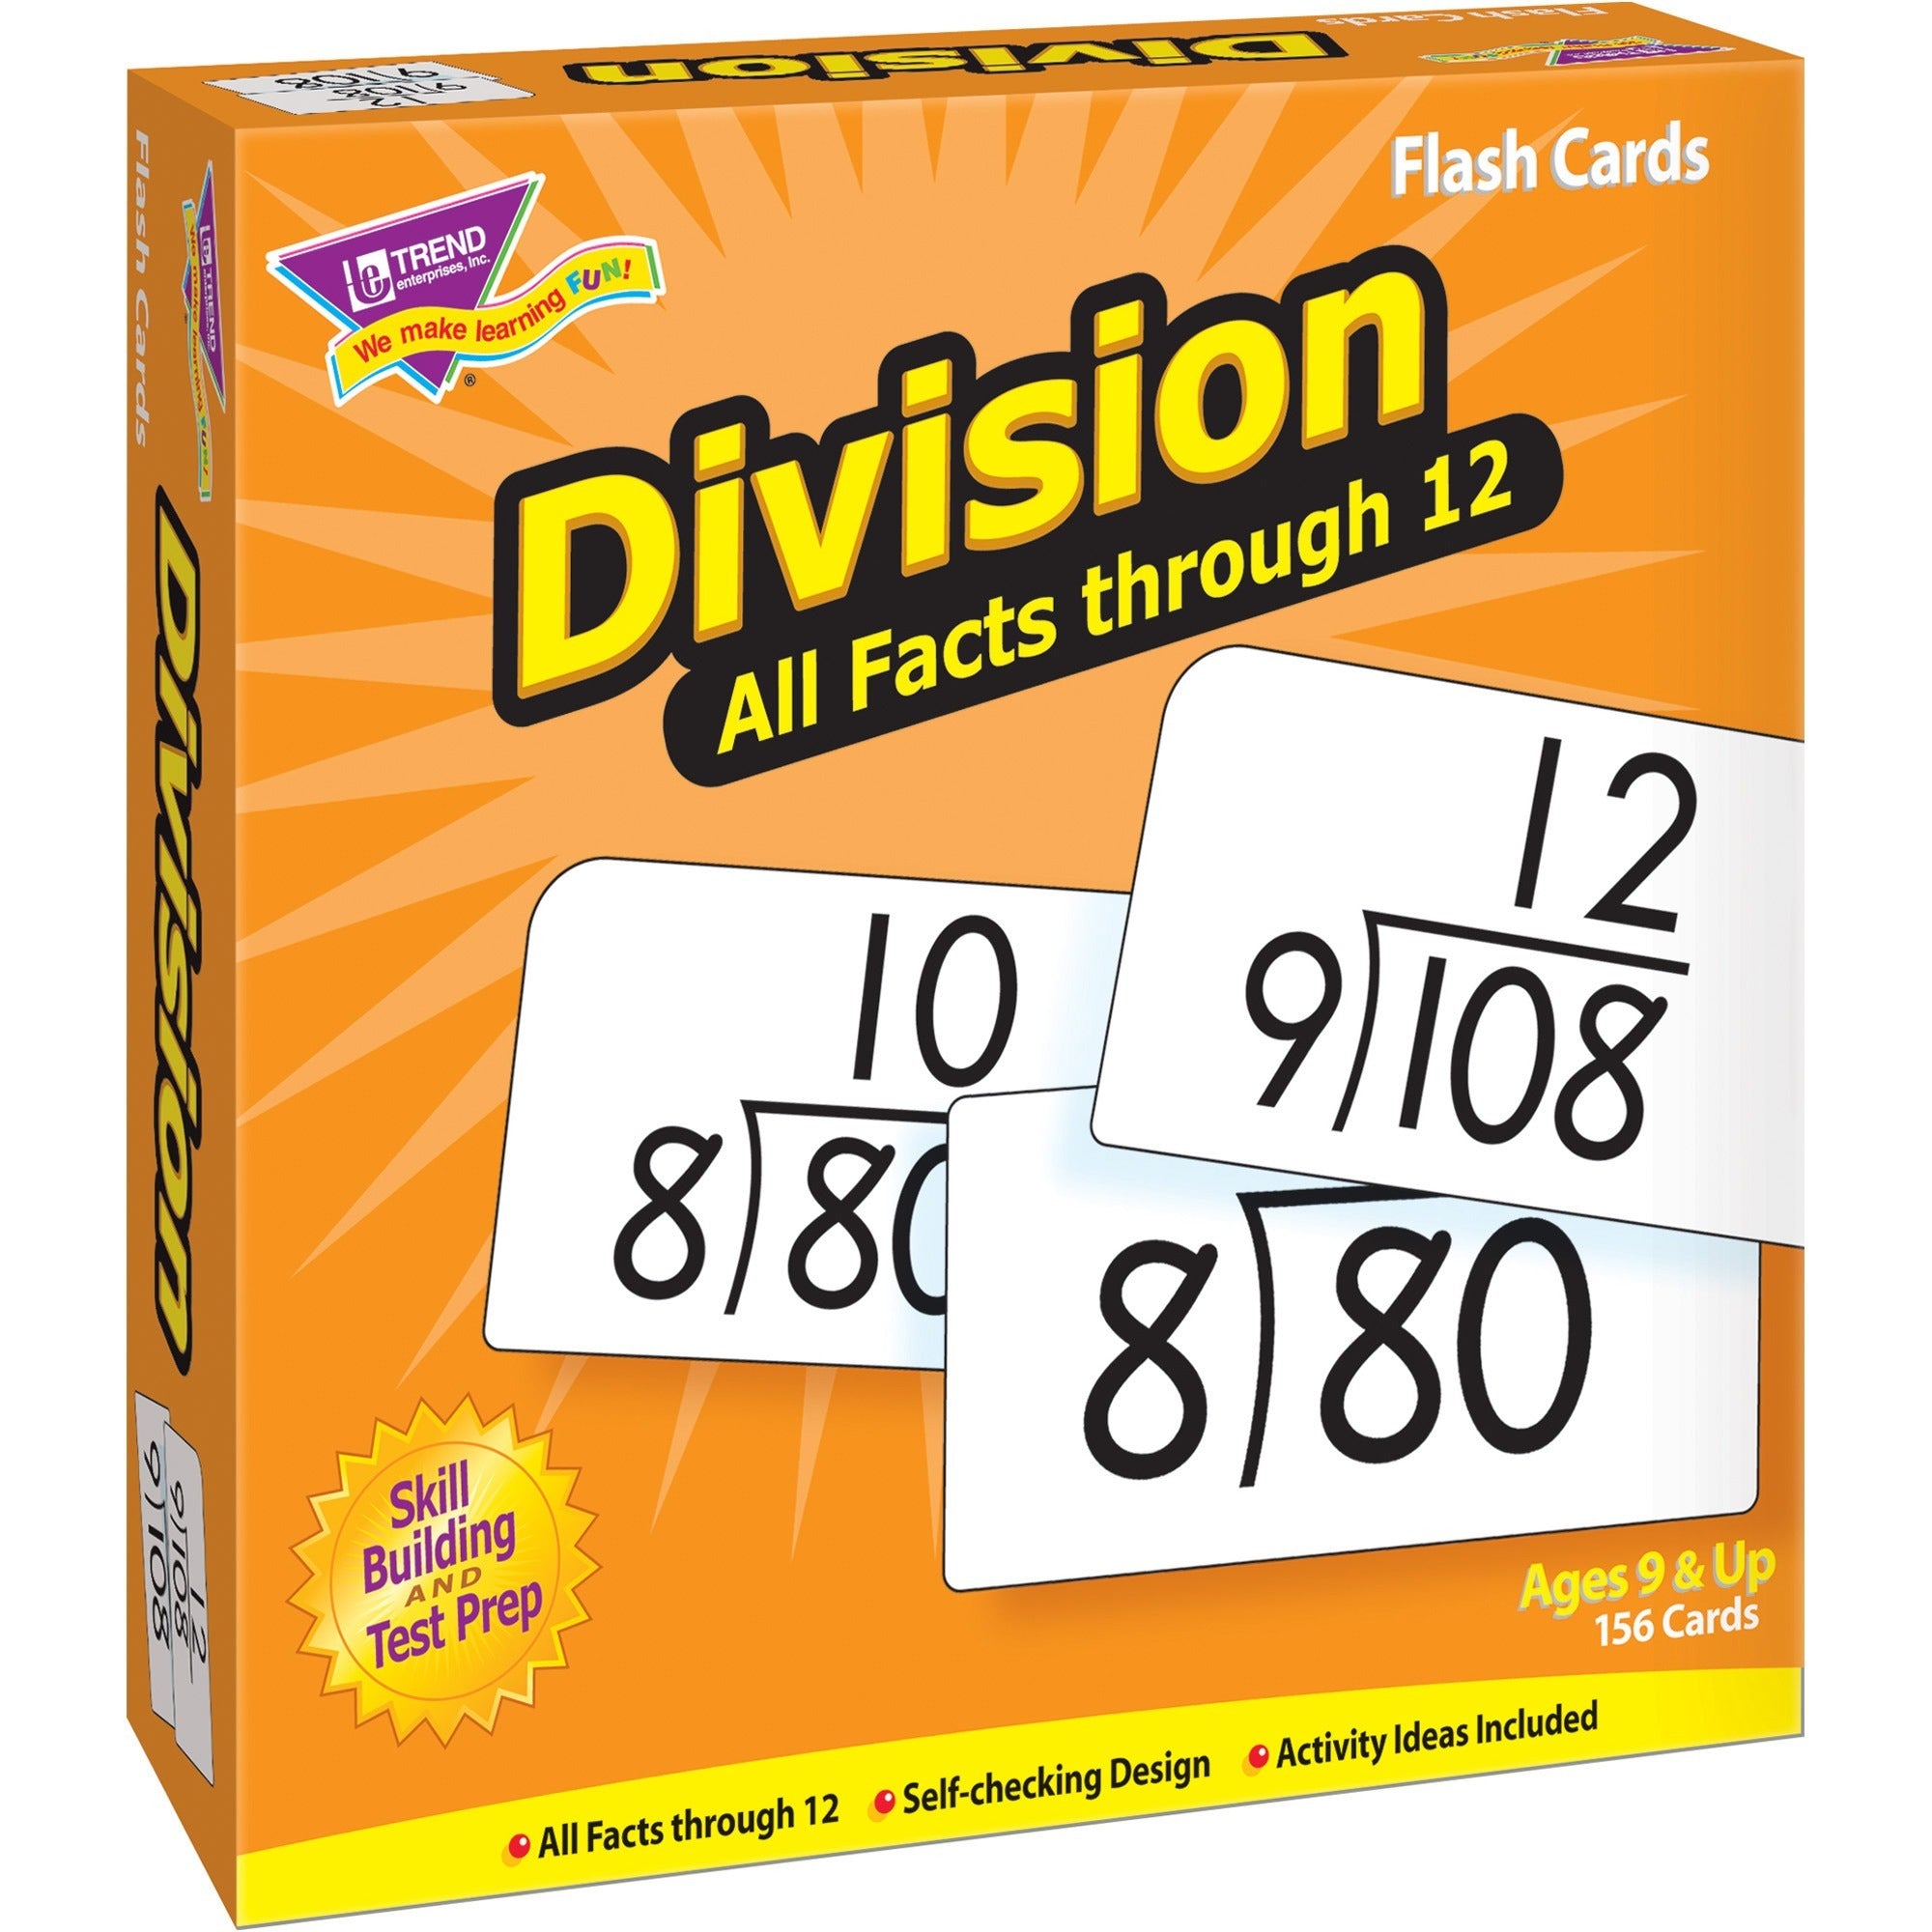 trend-division-all-facts-through-12-flash-cards-theme-subject-learning-skill-learning-division-156-pieces-9+-156-box_tep53204 - 1